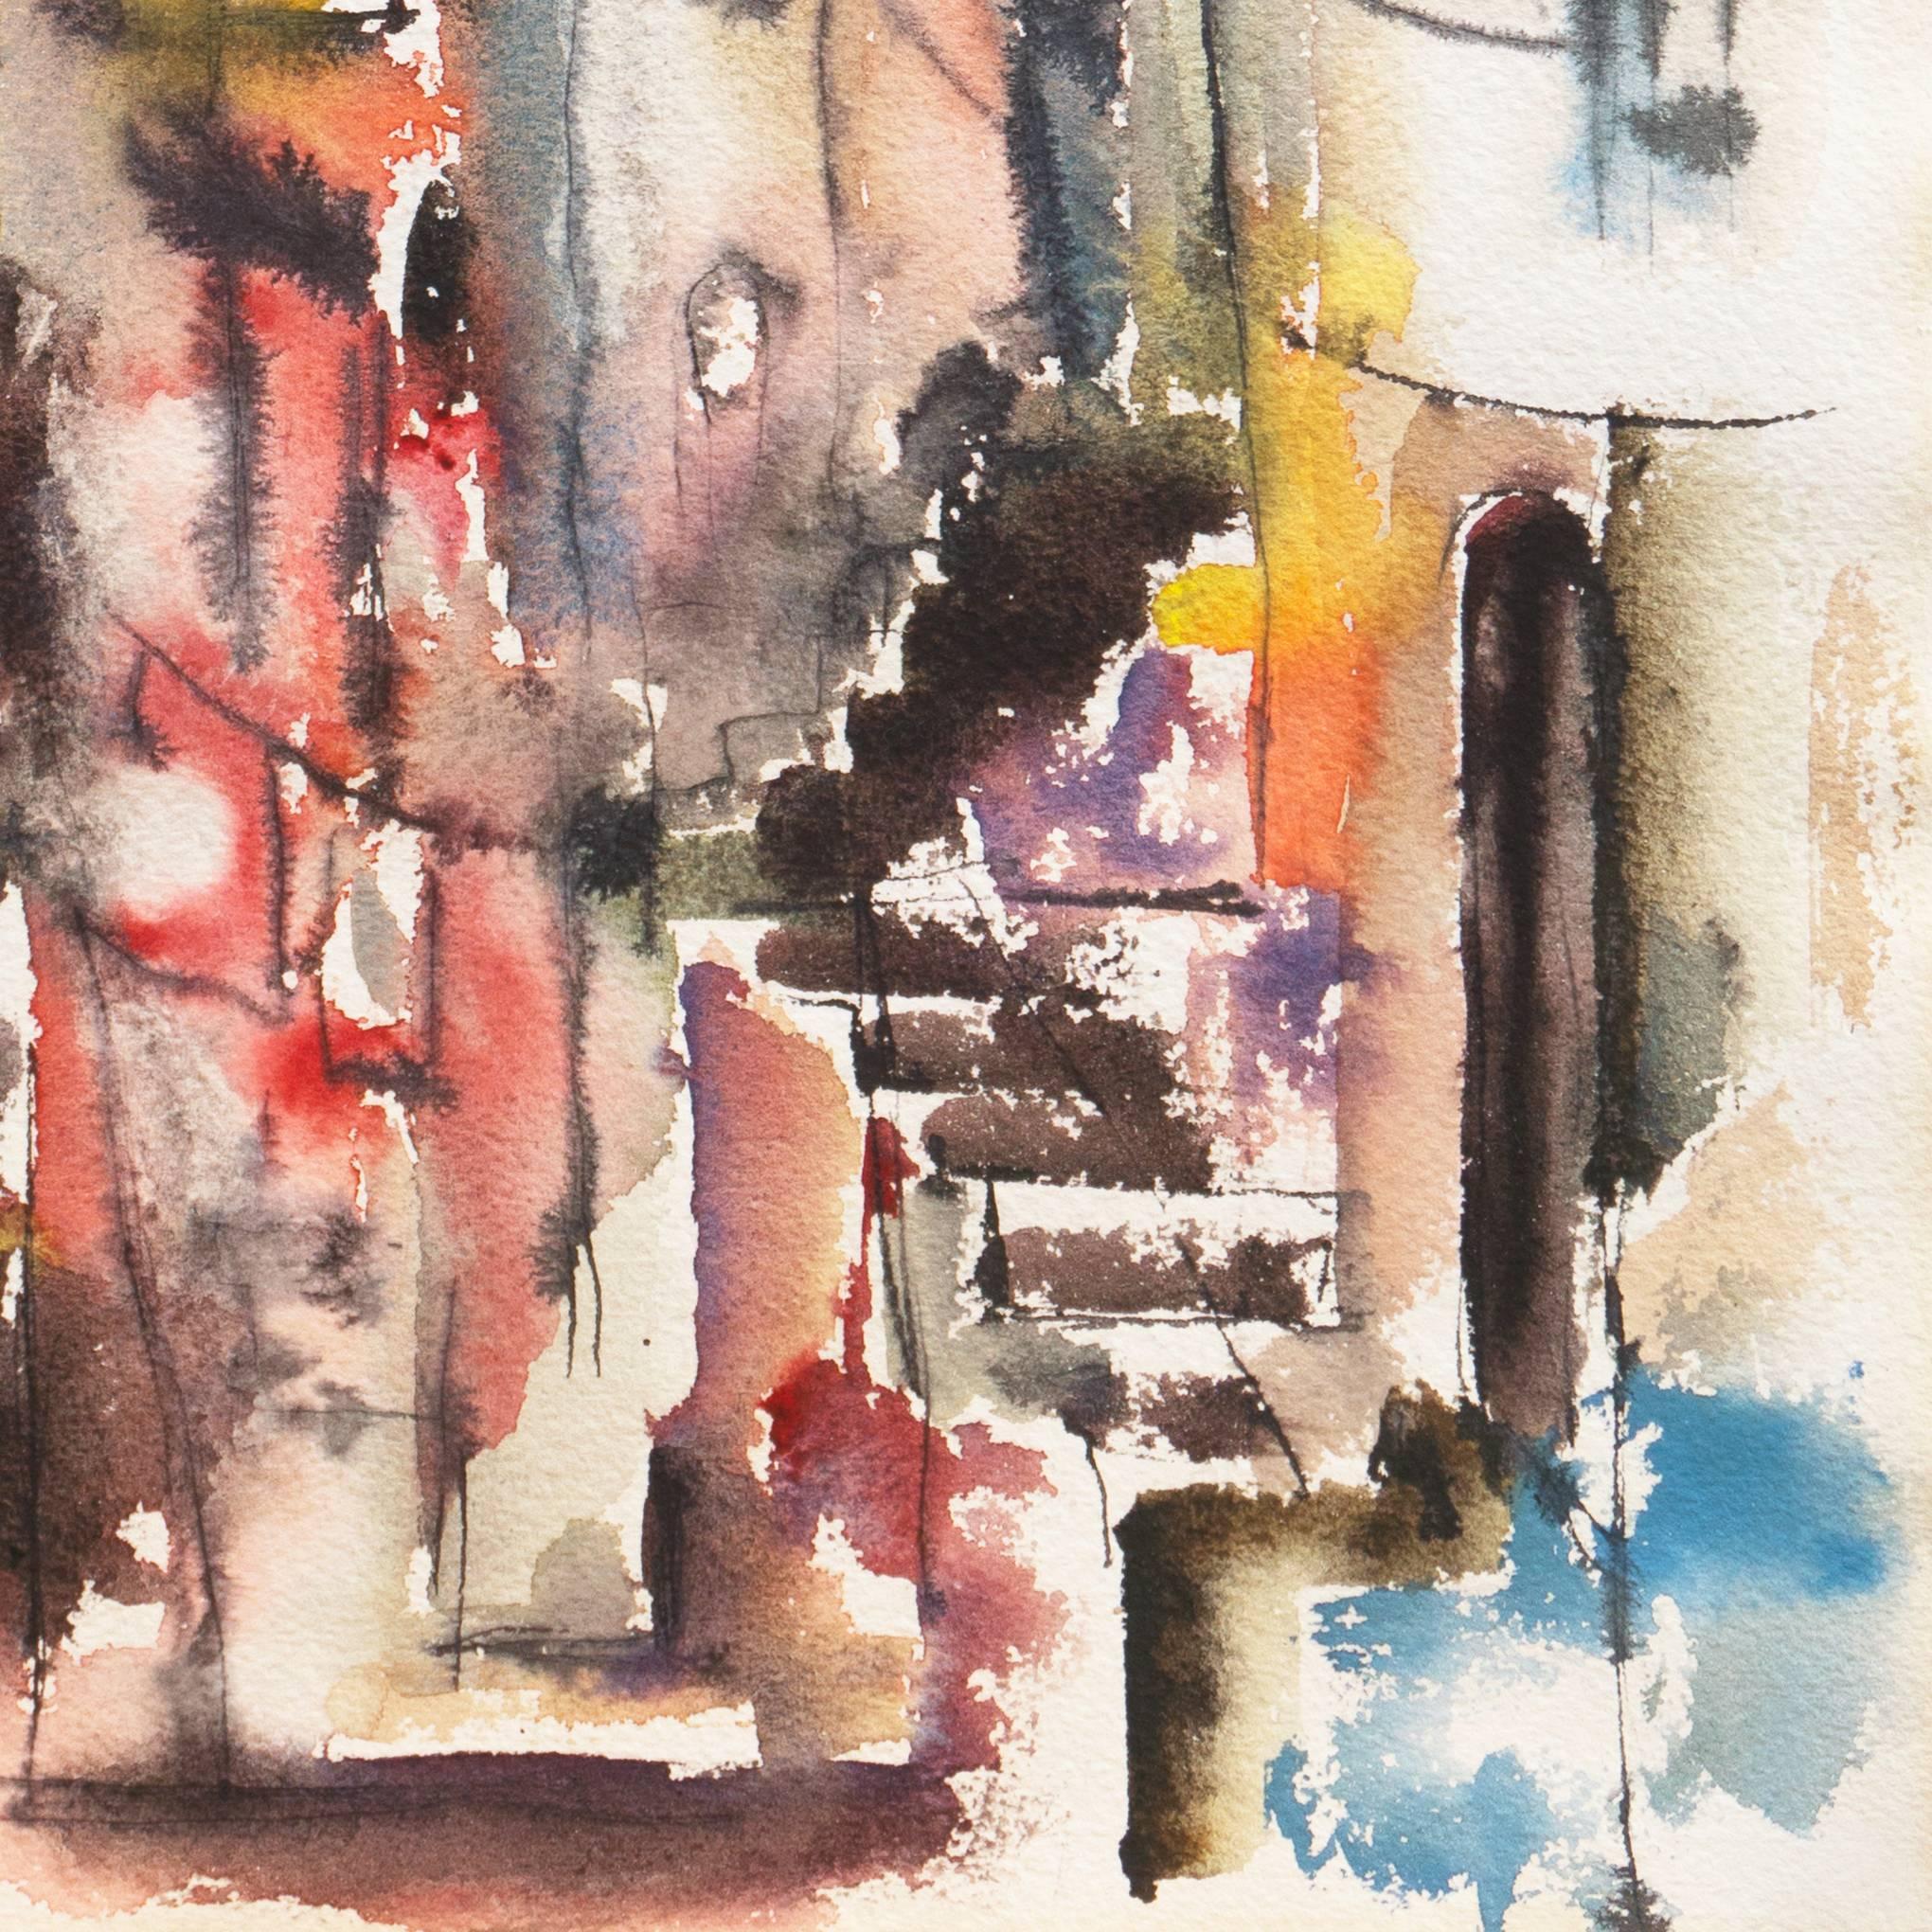 'At the Stoop', Mid-century Urban Watercolor, University of Tennessee 1